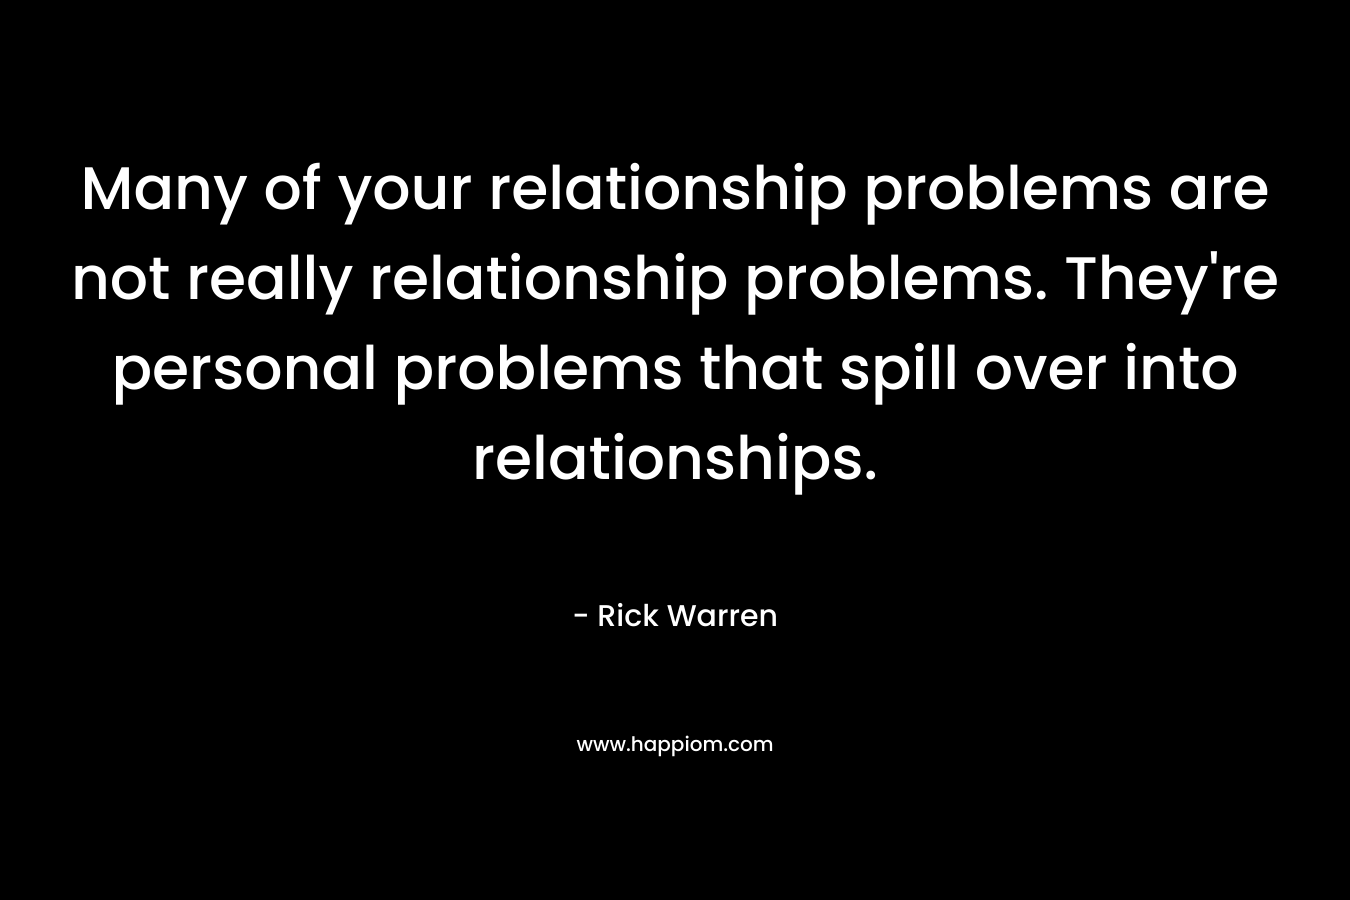 Many of your relationship problems are not really relationship problems. They’re personal problems that spill over into relationships. – Rick Warren